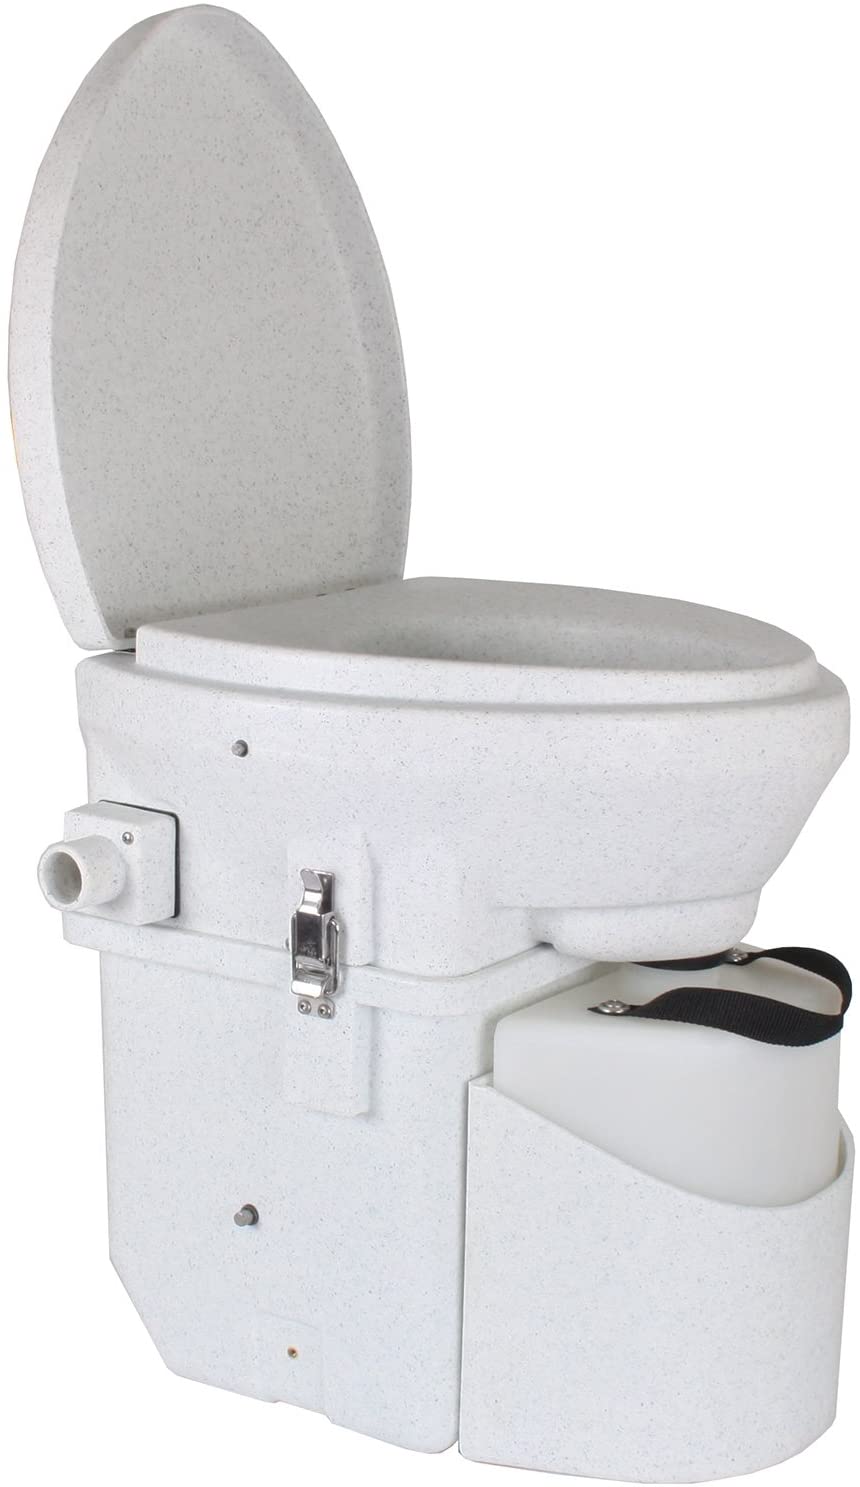 Nature's Head composting toilet is shown in this file photo.